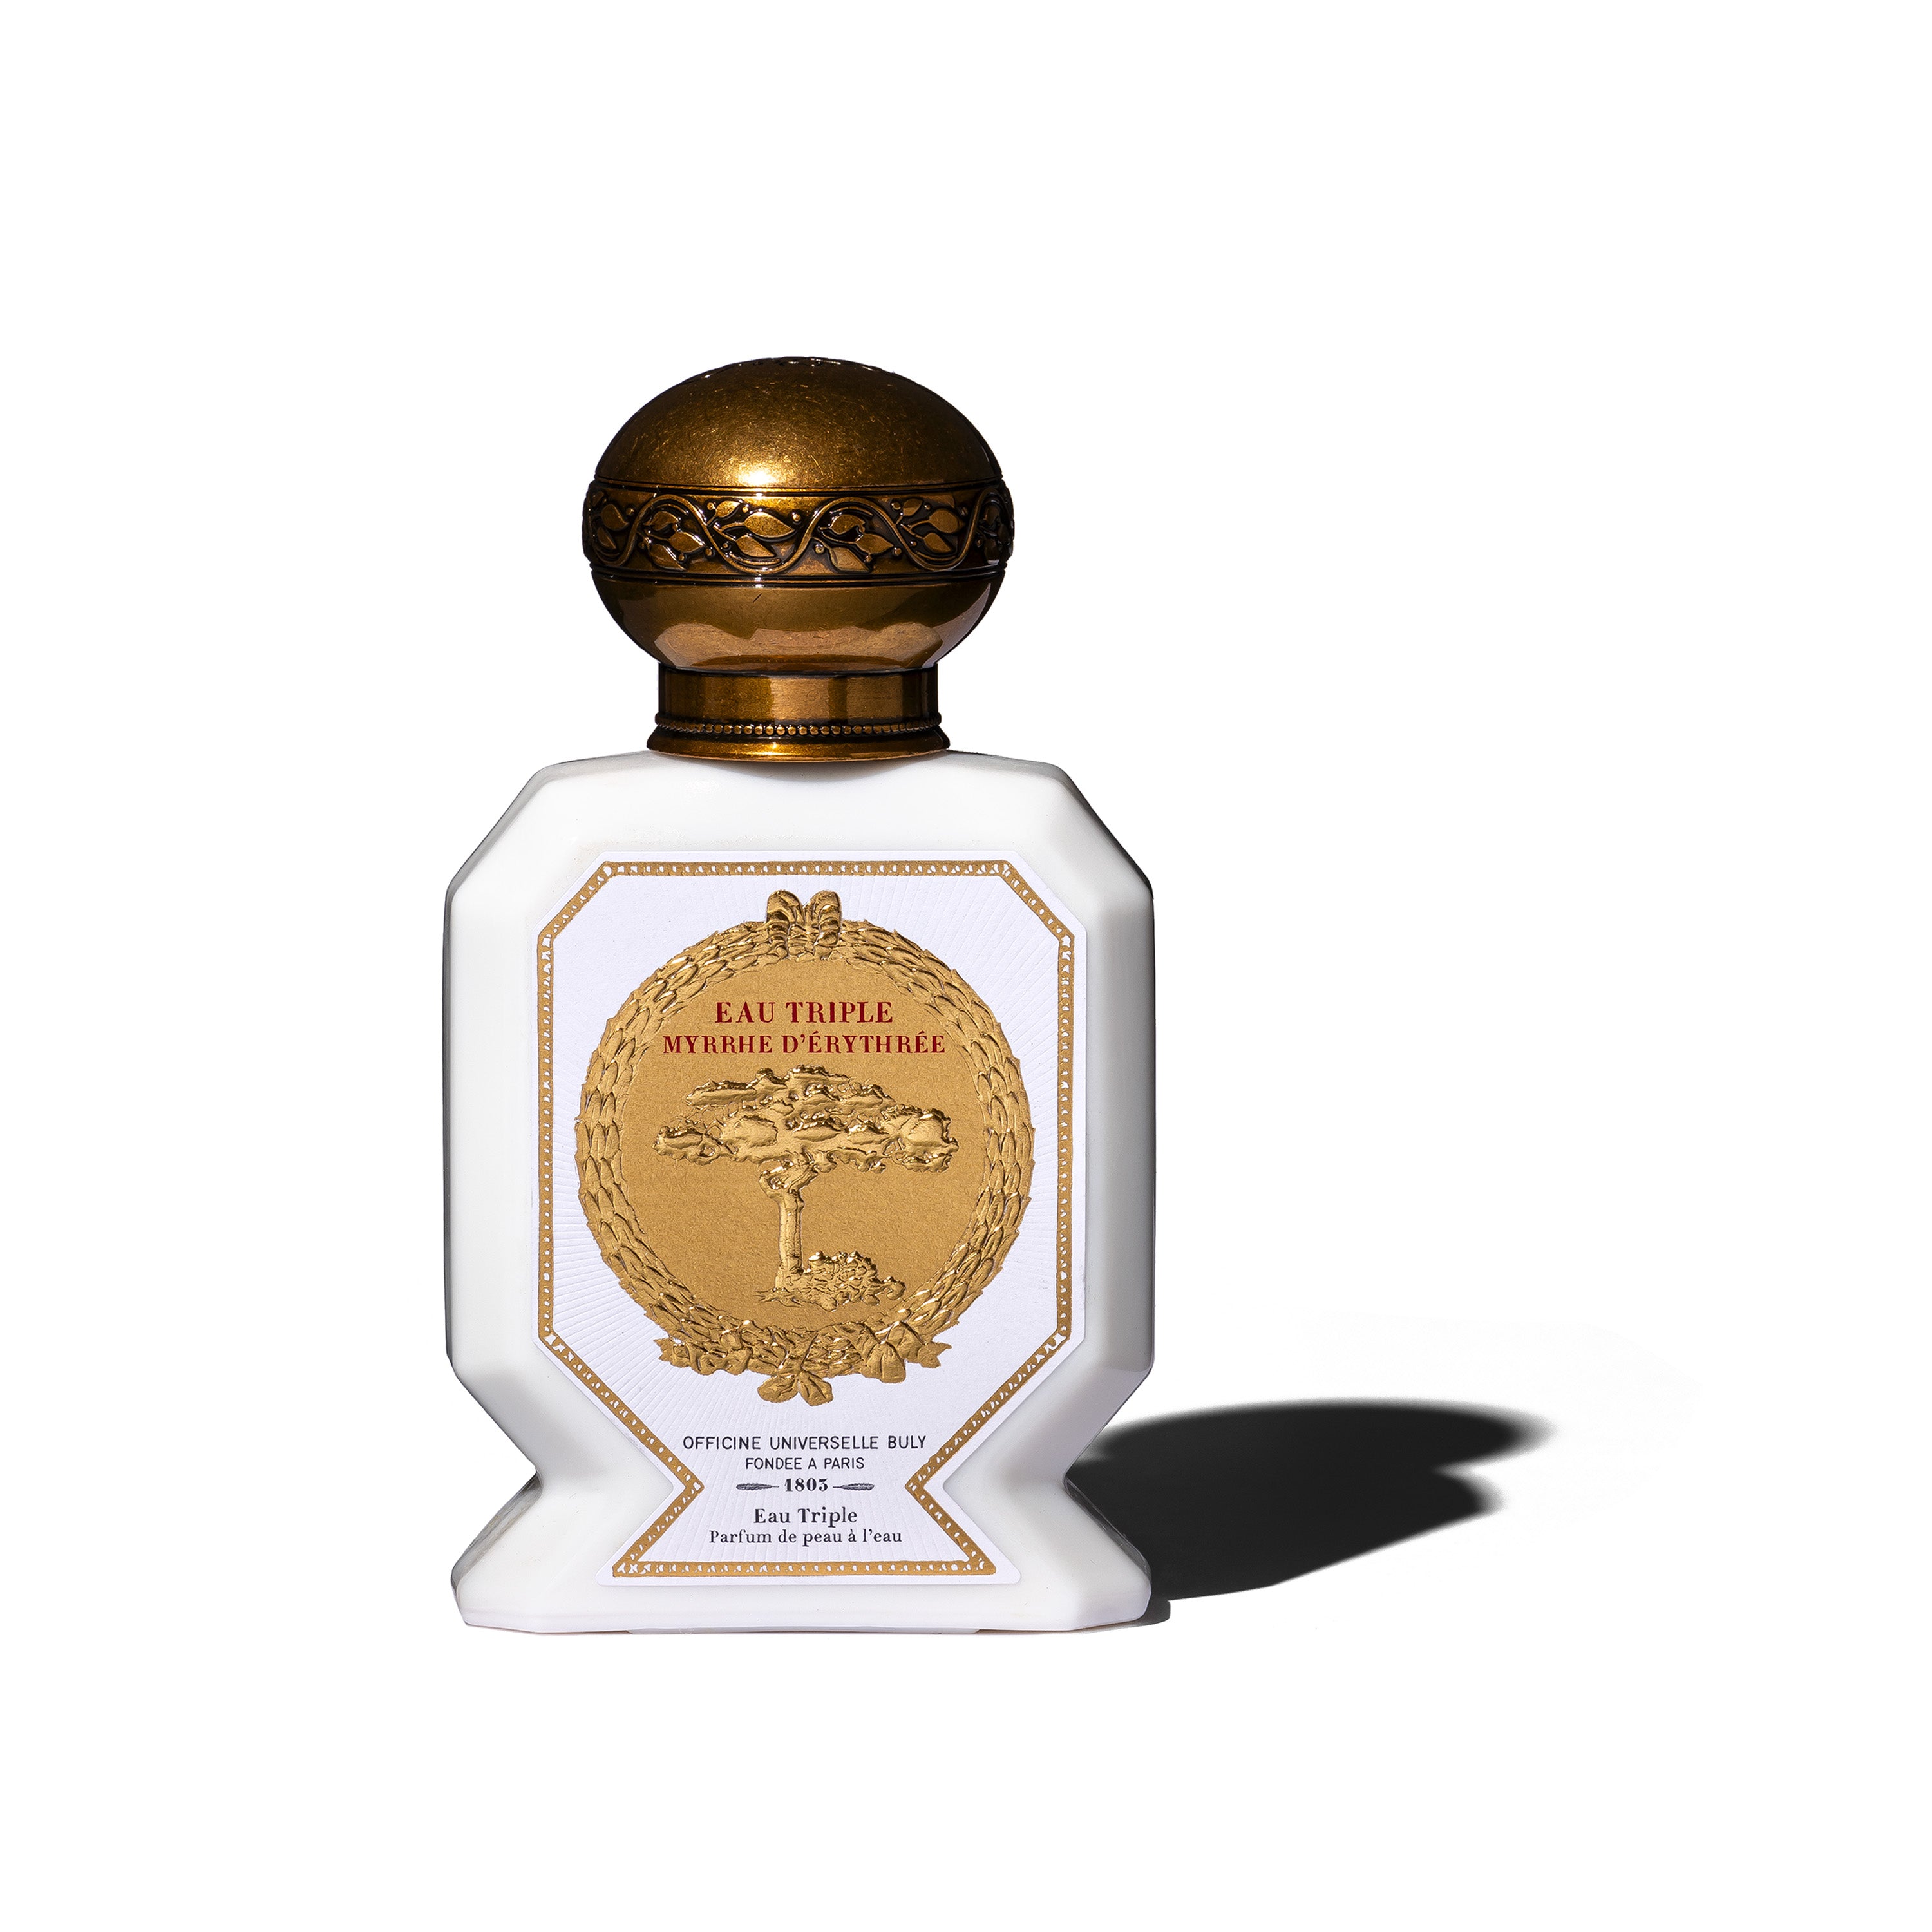 WATER-BASED PERFUMES – Officine Universelle Buly